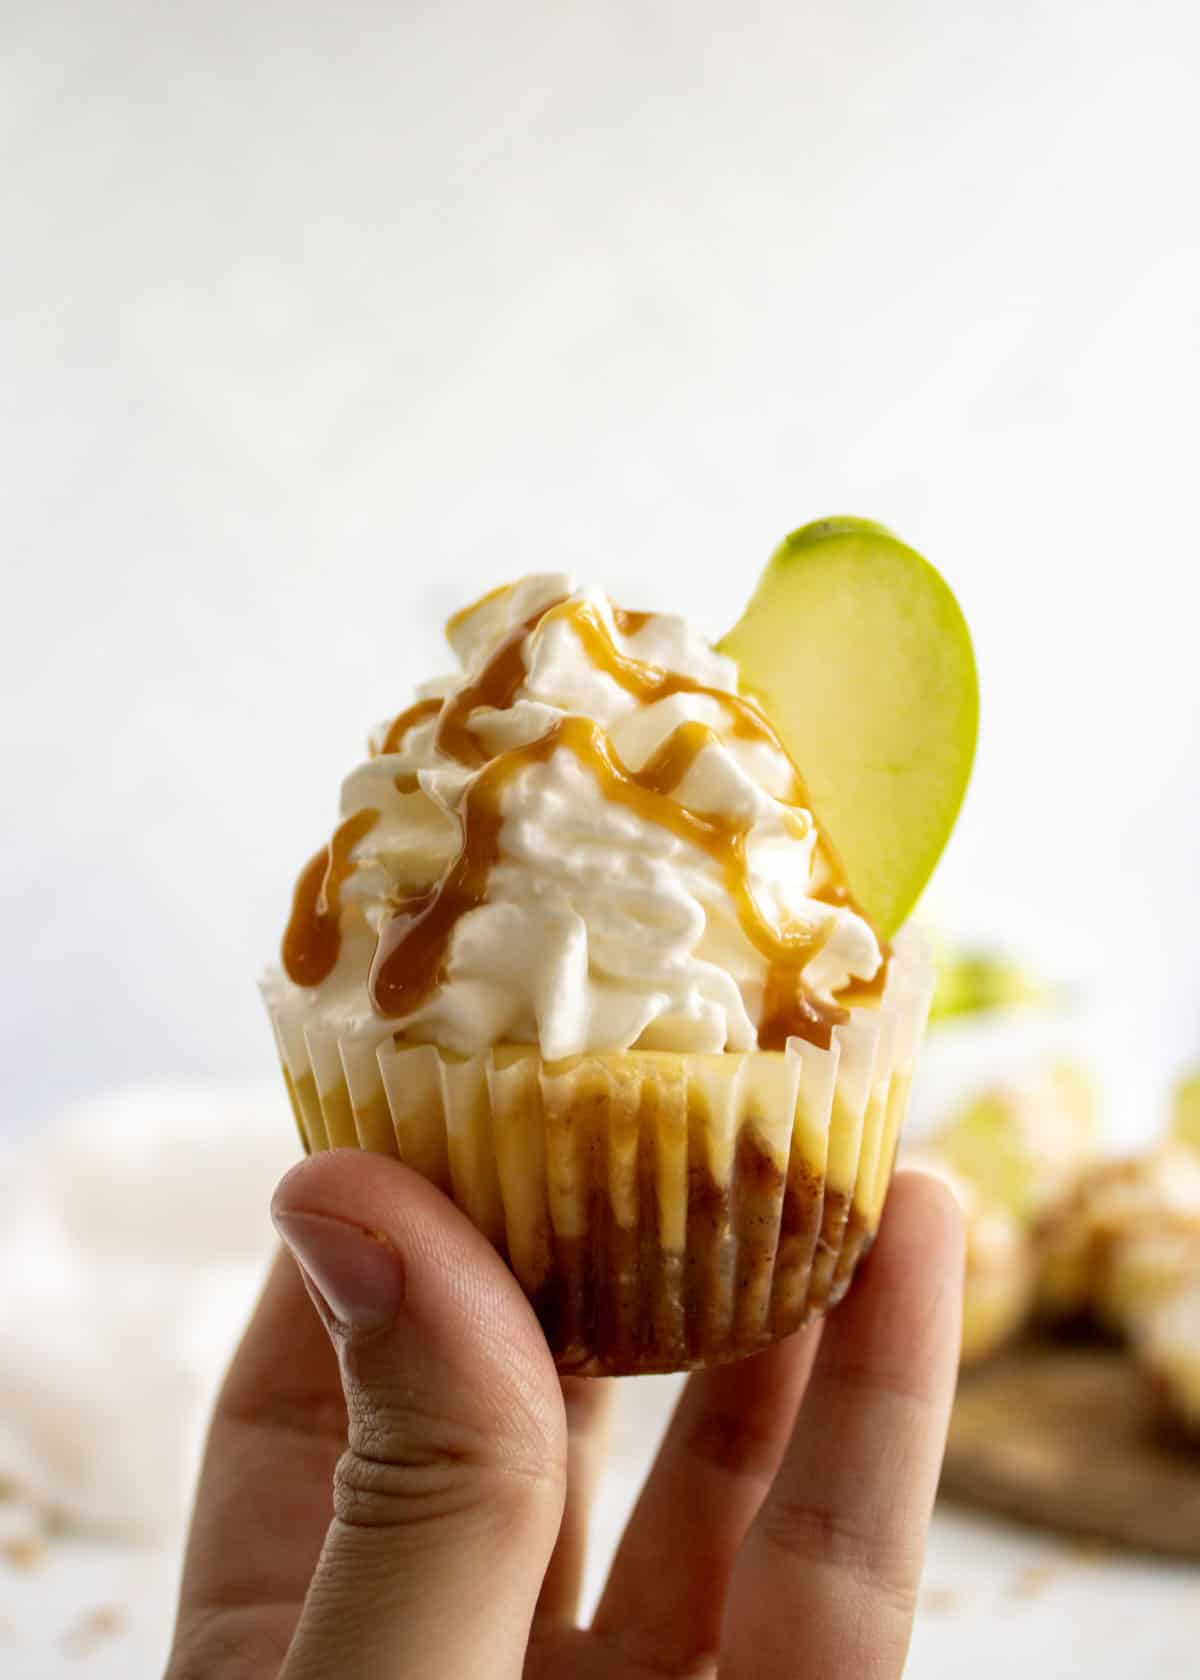 A hand holding up a mini caramel apple cheesecake in a cupcake paper topped with whipped cream, an apple slice, and drizzled with caramel sauce.